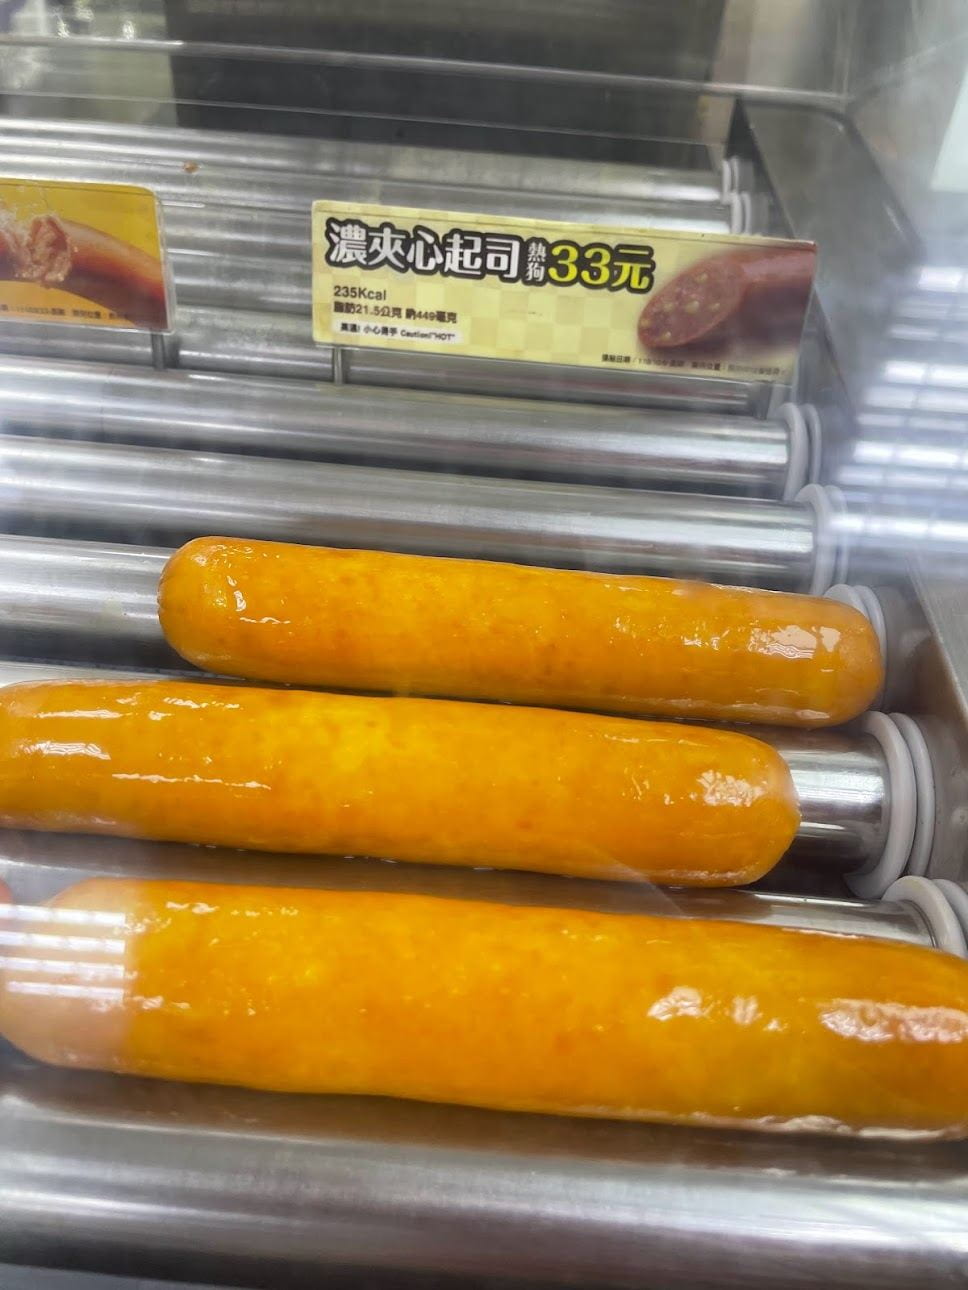 sausages for sale at a Taiwan Seven Eleven